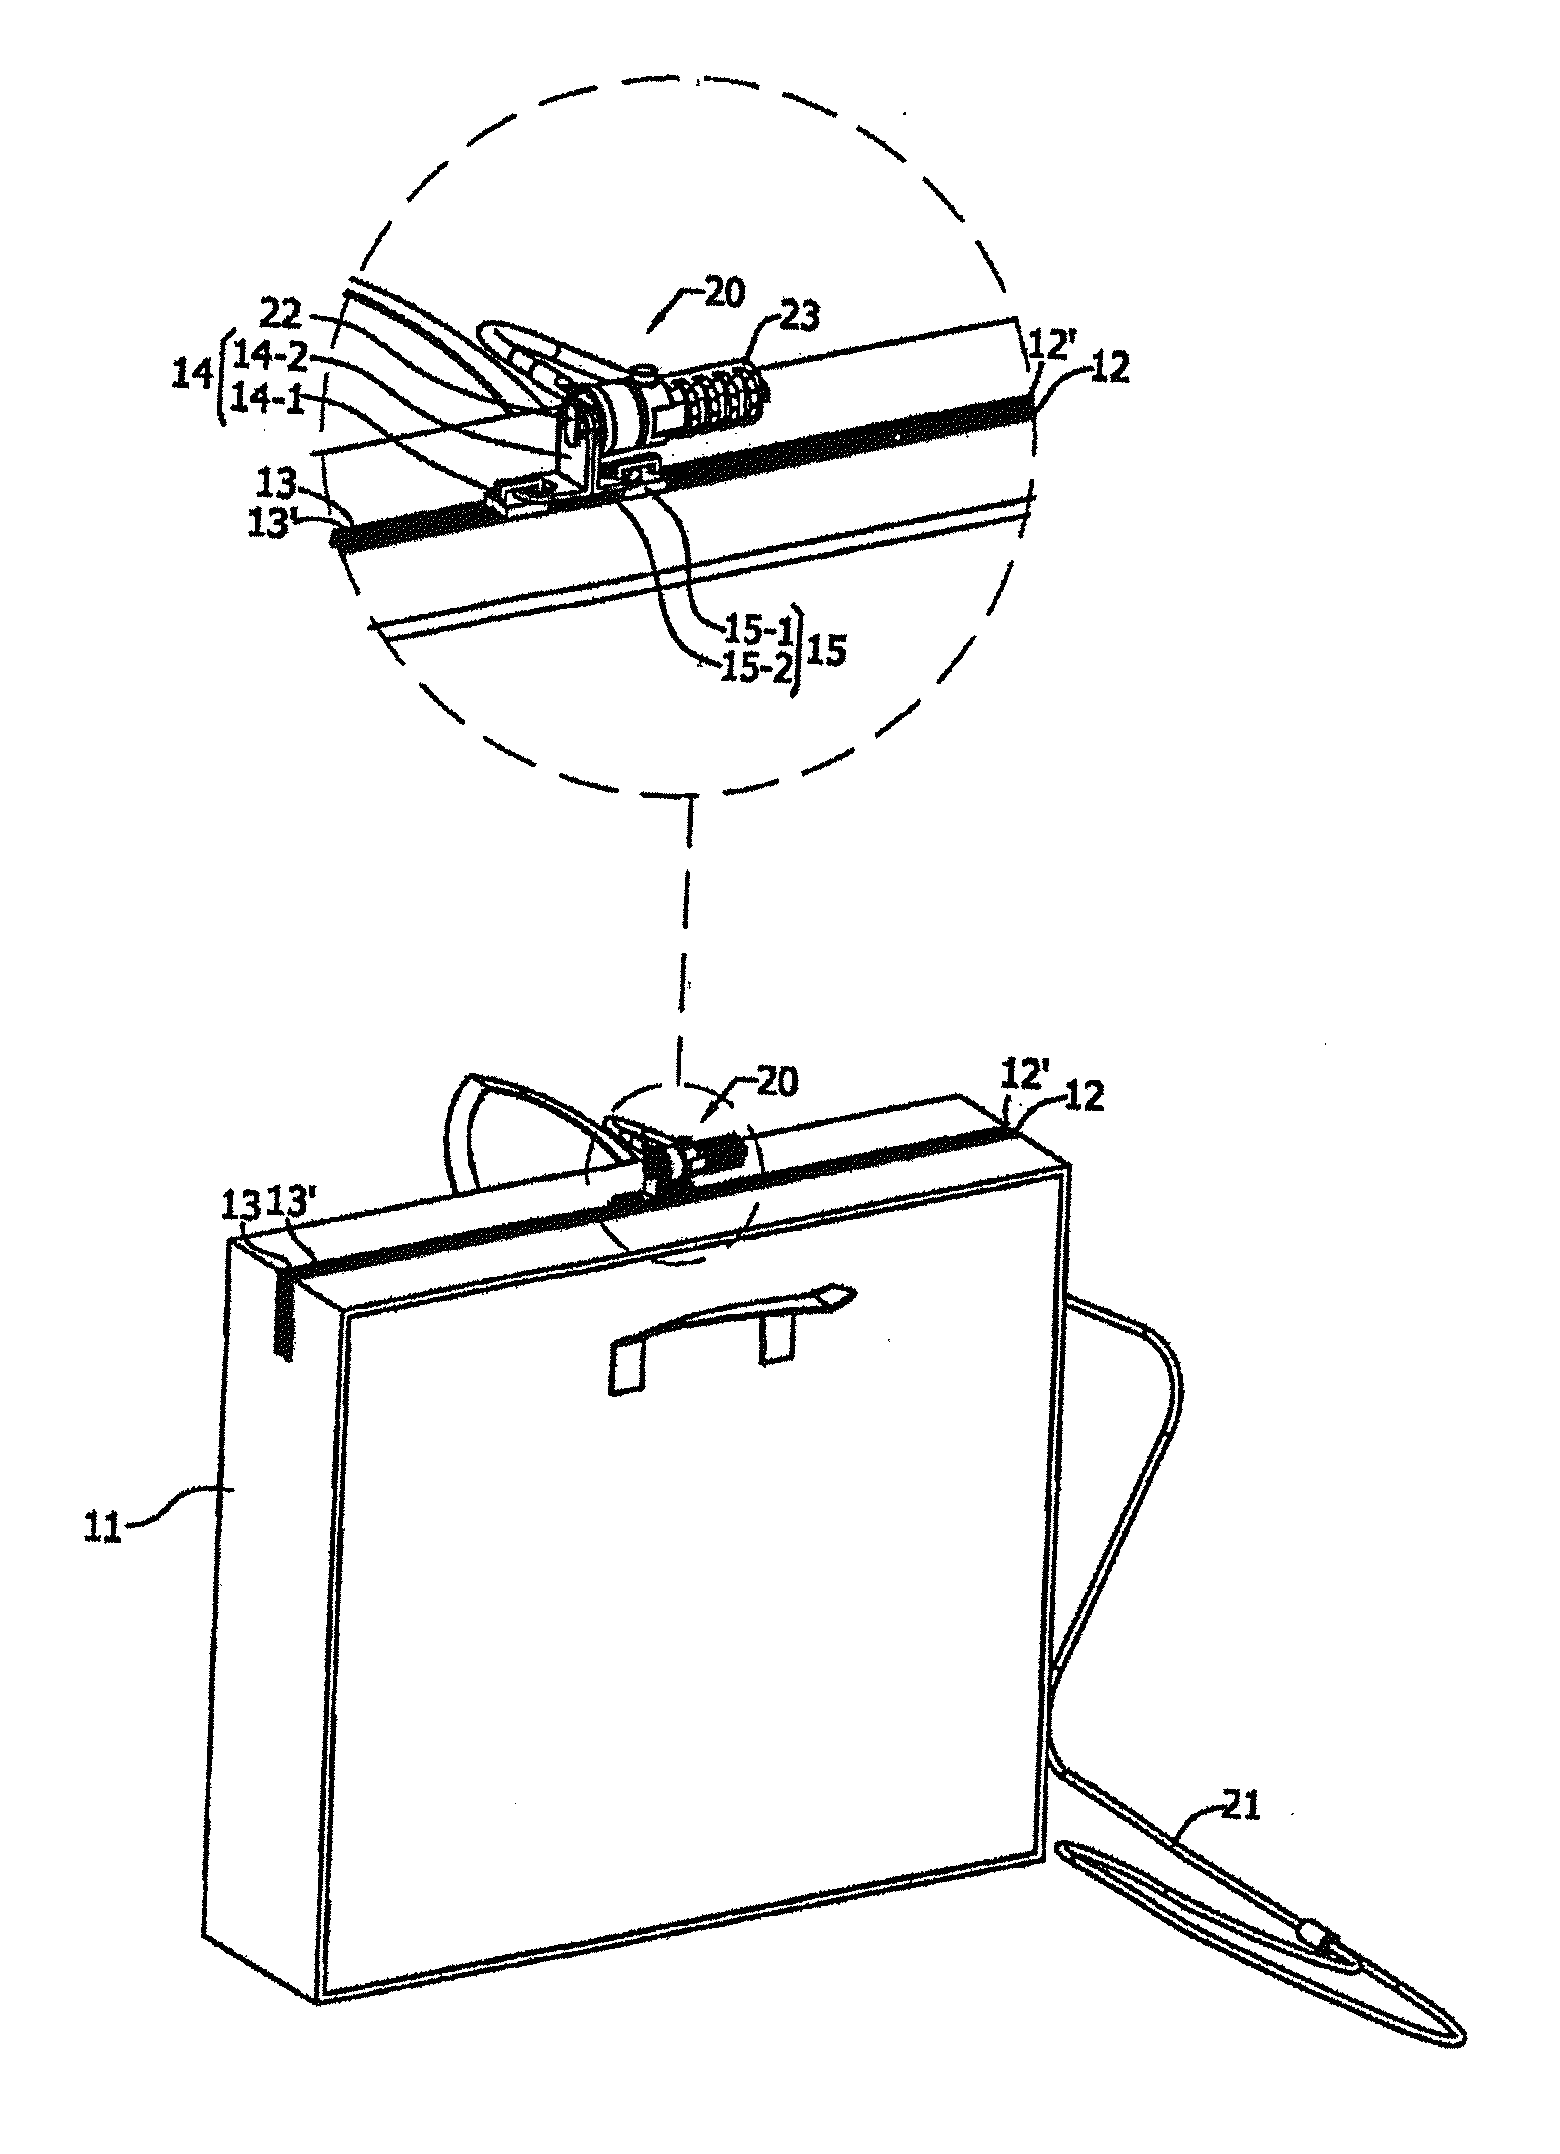 Bag with Anti-theft function cross reference to related application